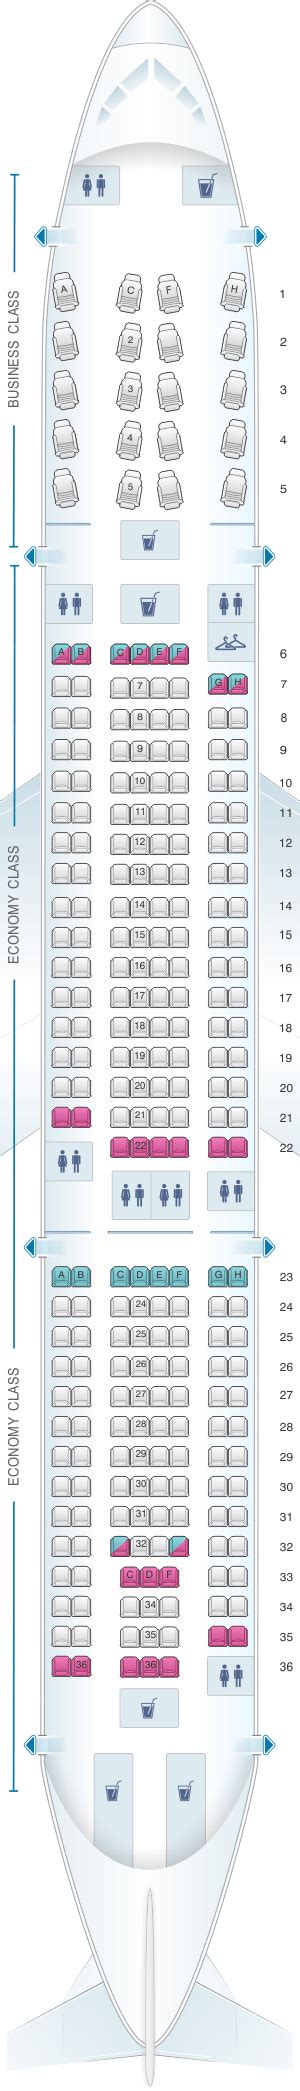 Airbus A330 200 Seating Chart American Airlines